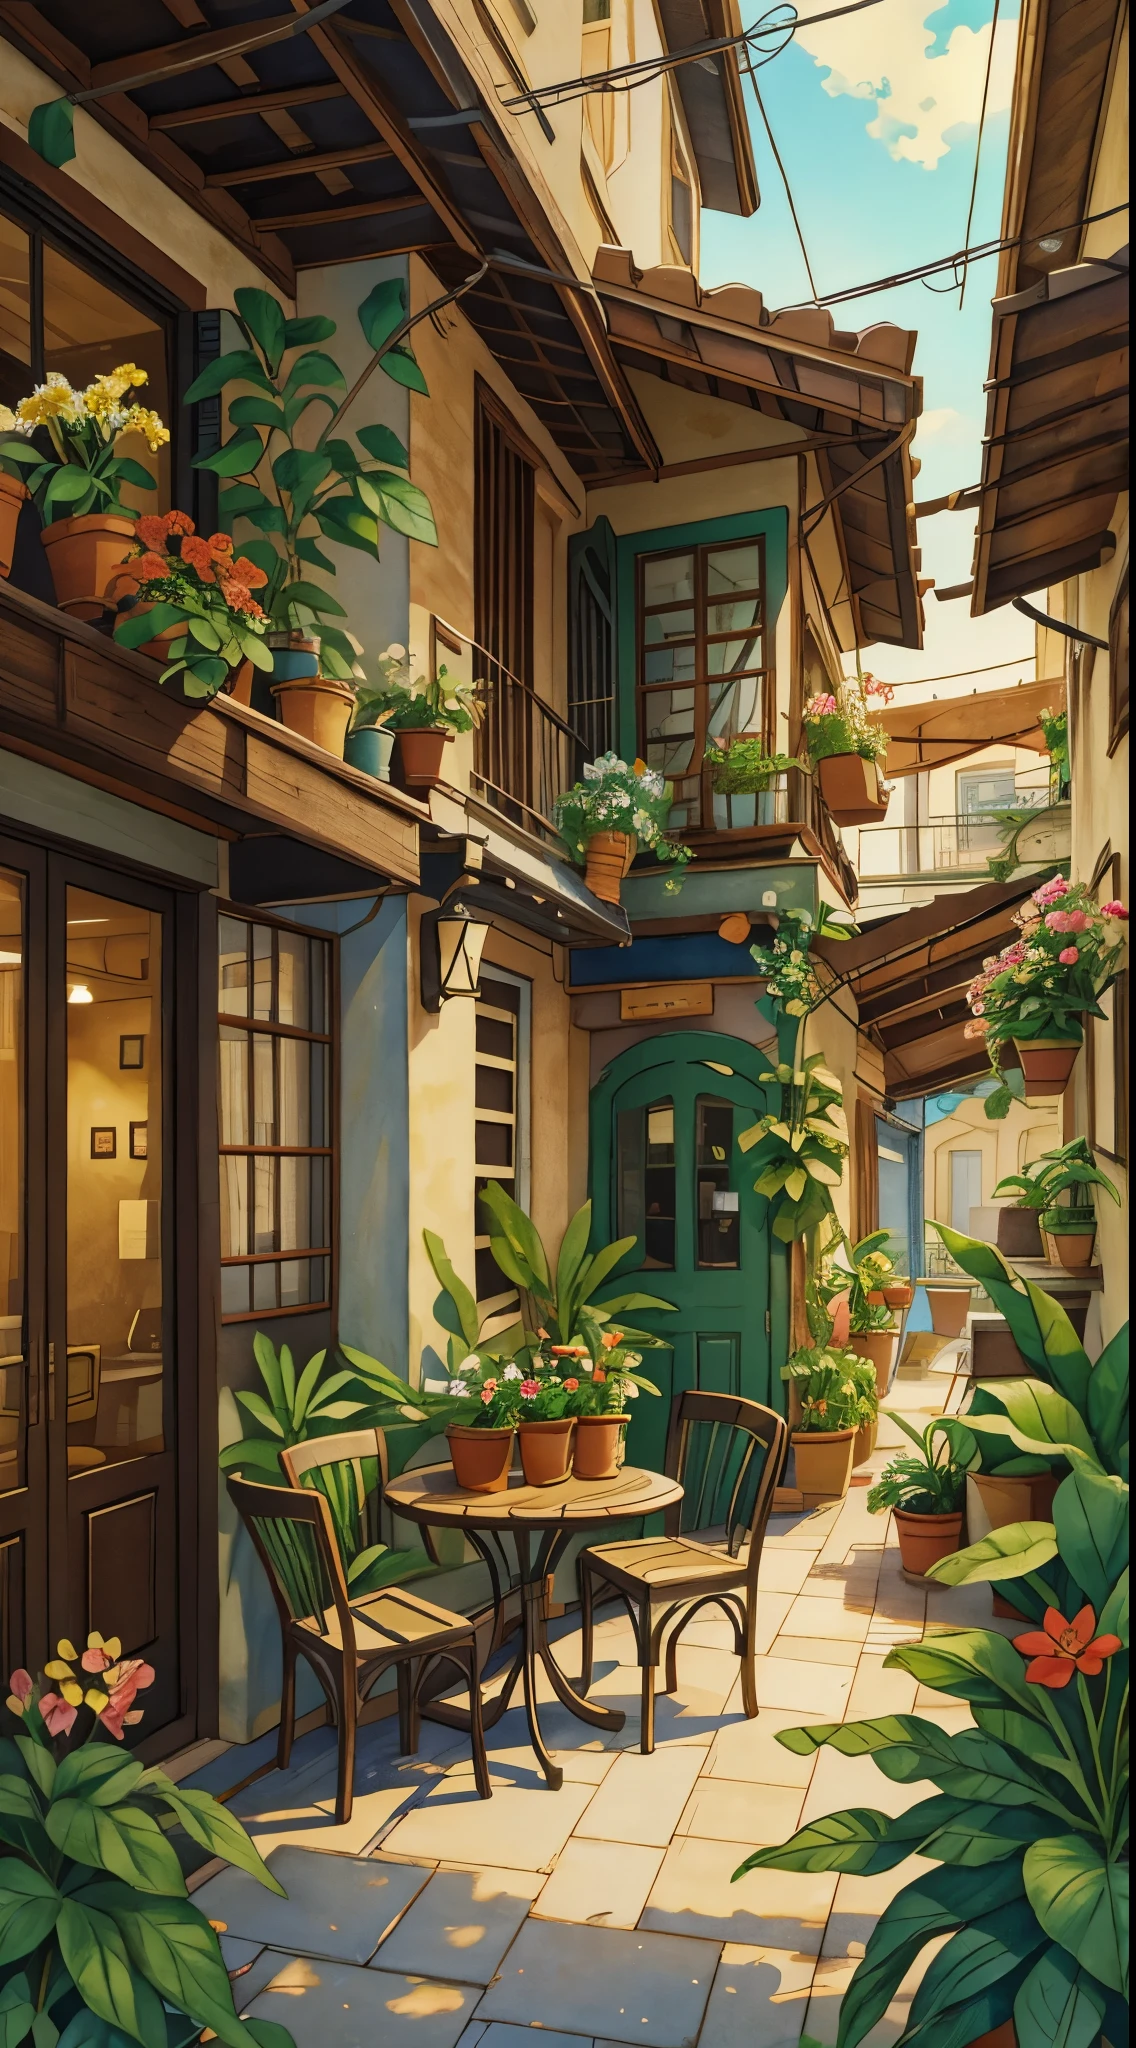 JZCG021,Flower Store,Coffee Spot,A table,chairs,no one,windows,Flowers,vegetation,flower pot,watercolor (medium),landscapes,Gate,air conditioner,illustration (medium),traditional media,home,exteriors,balcony,architecture,Masterpiece,Best Quality,High Quality,vegetation,, Masterpiece,Best Quality,High Quality,